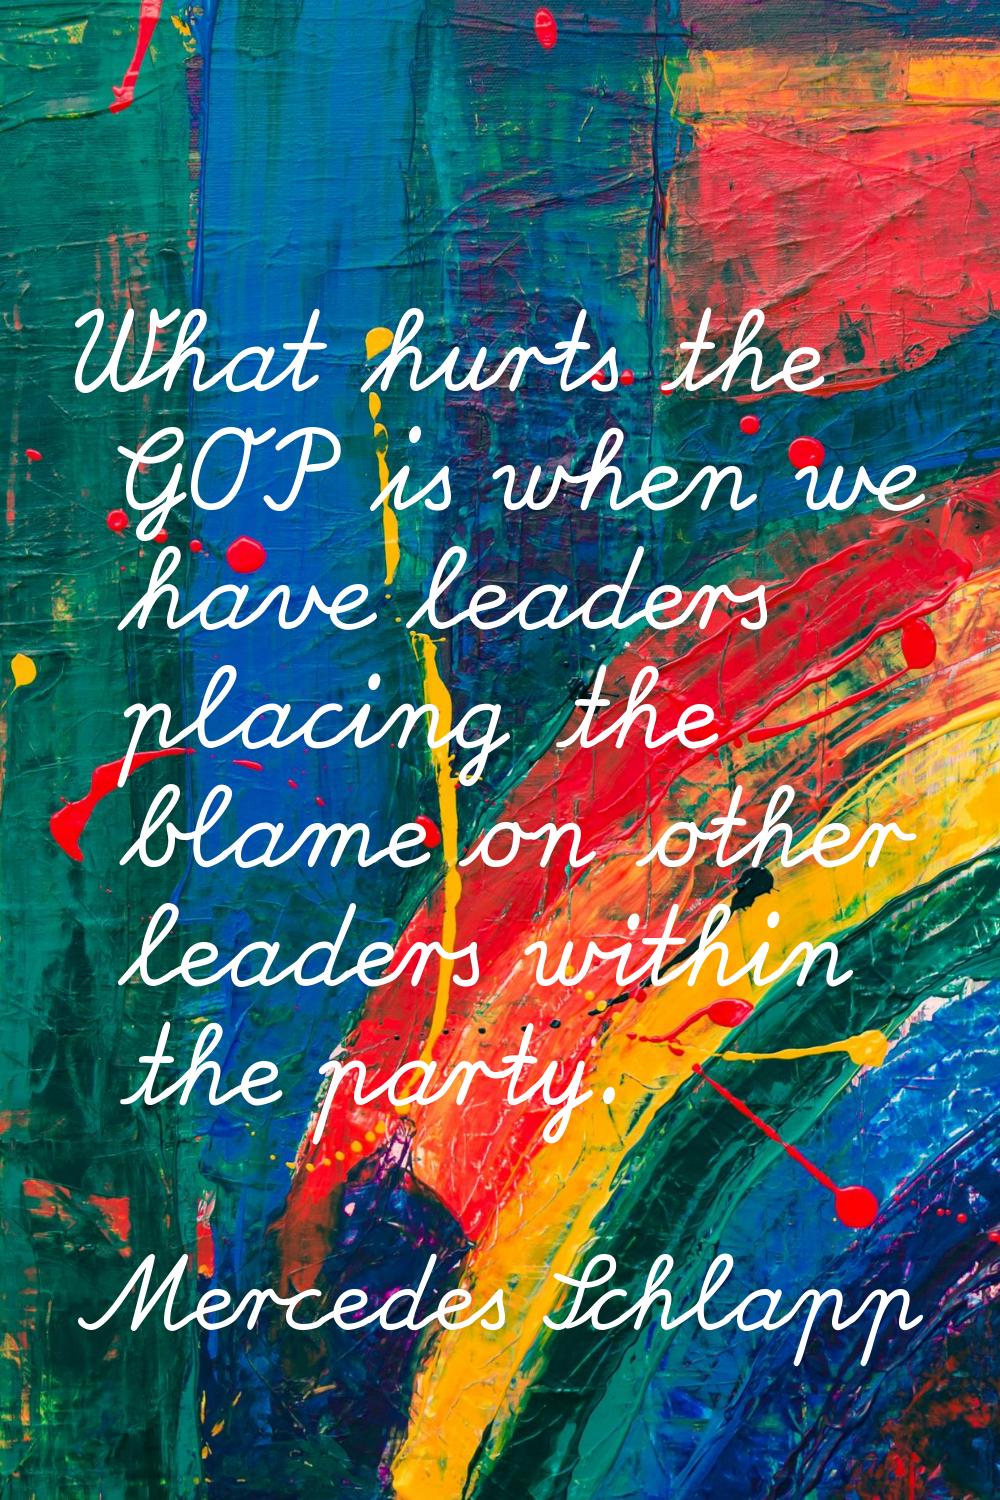 What hurts the GOP is when we have leaders placing the blame on other leaders within the party.